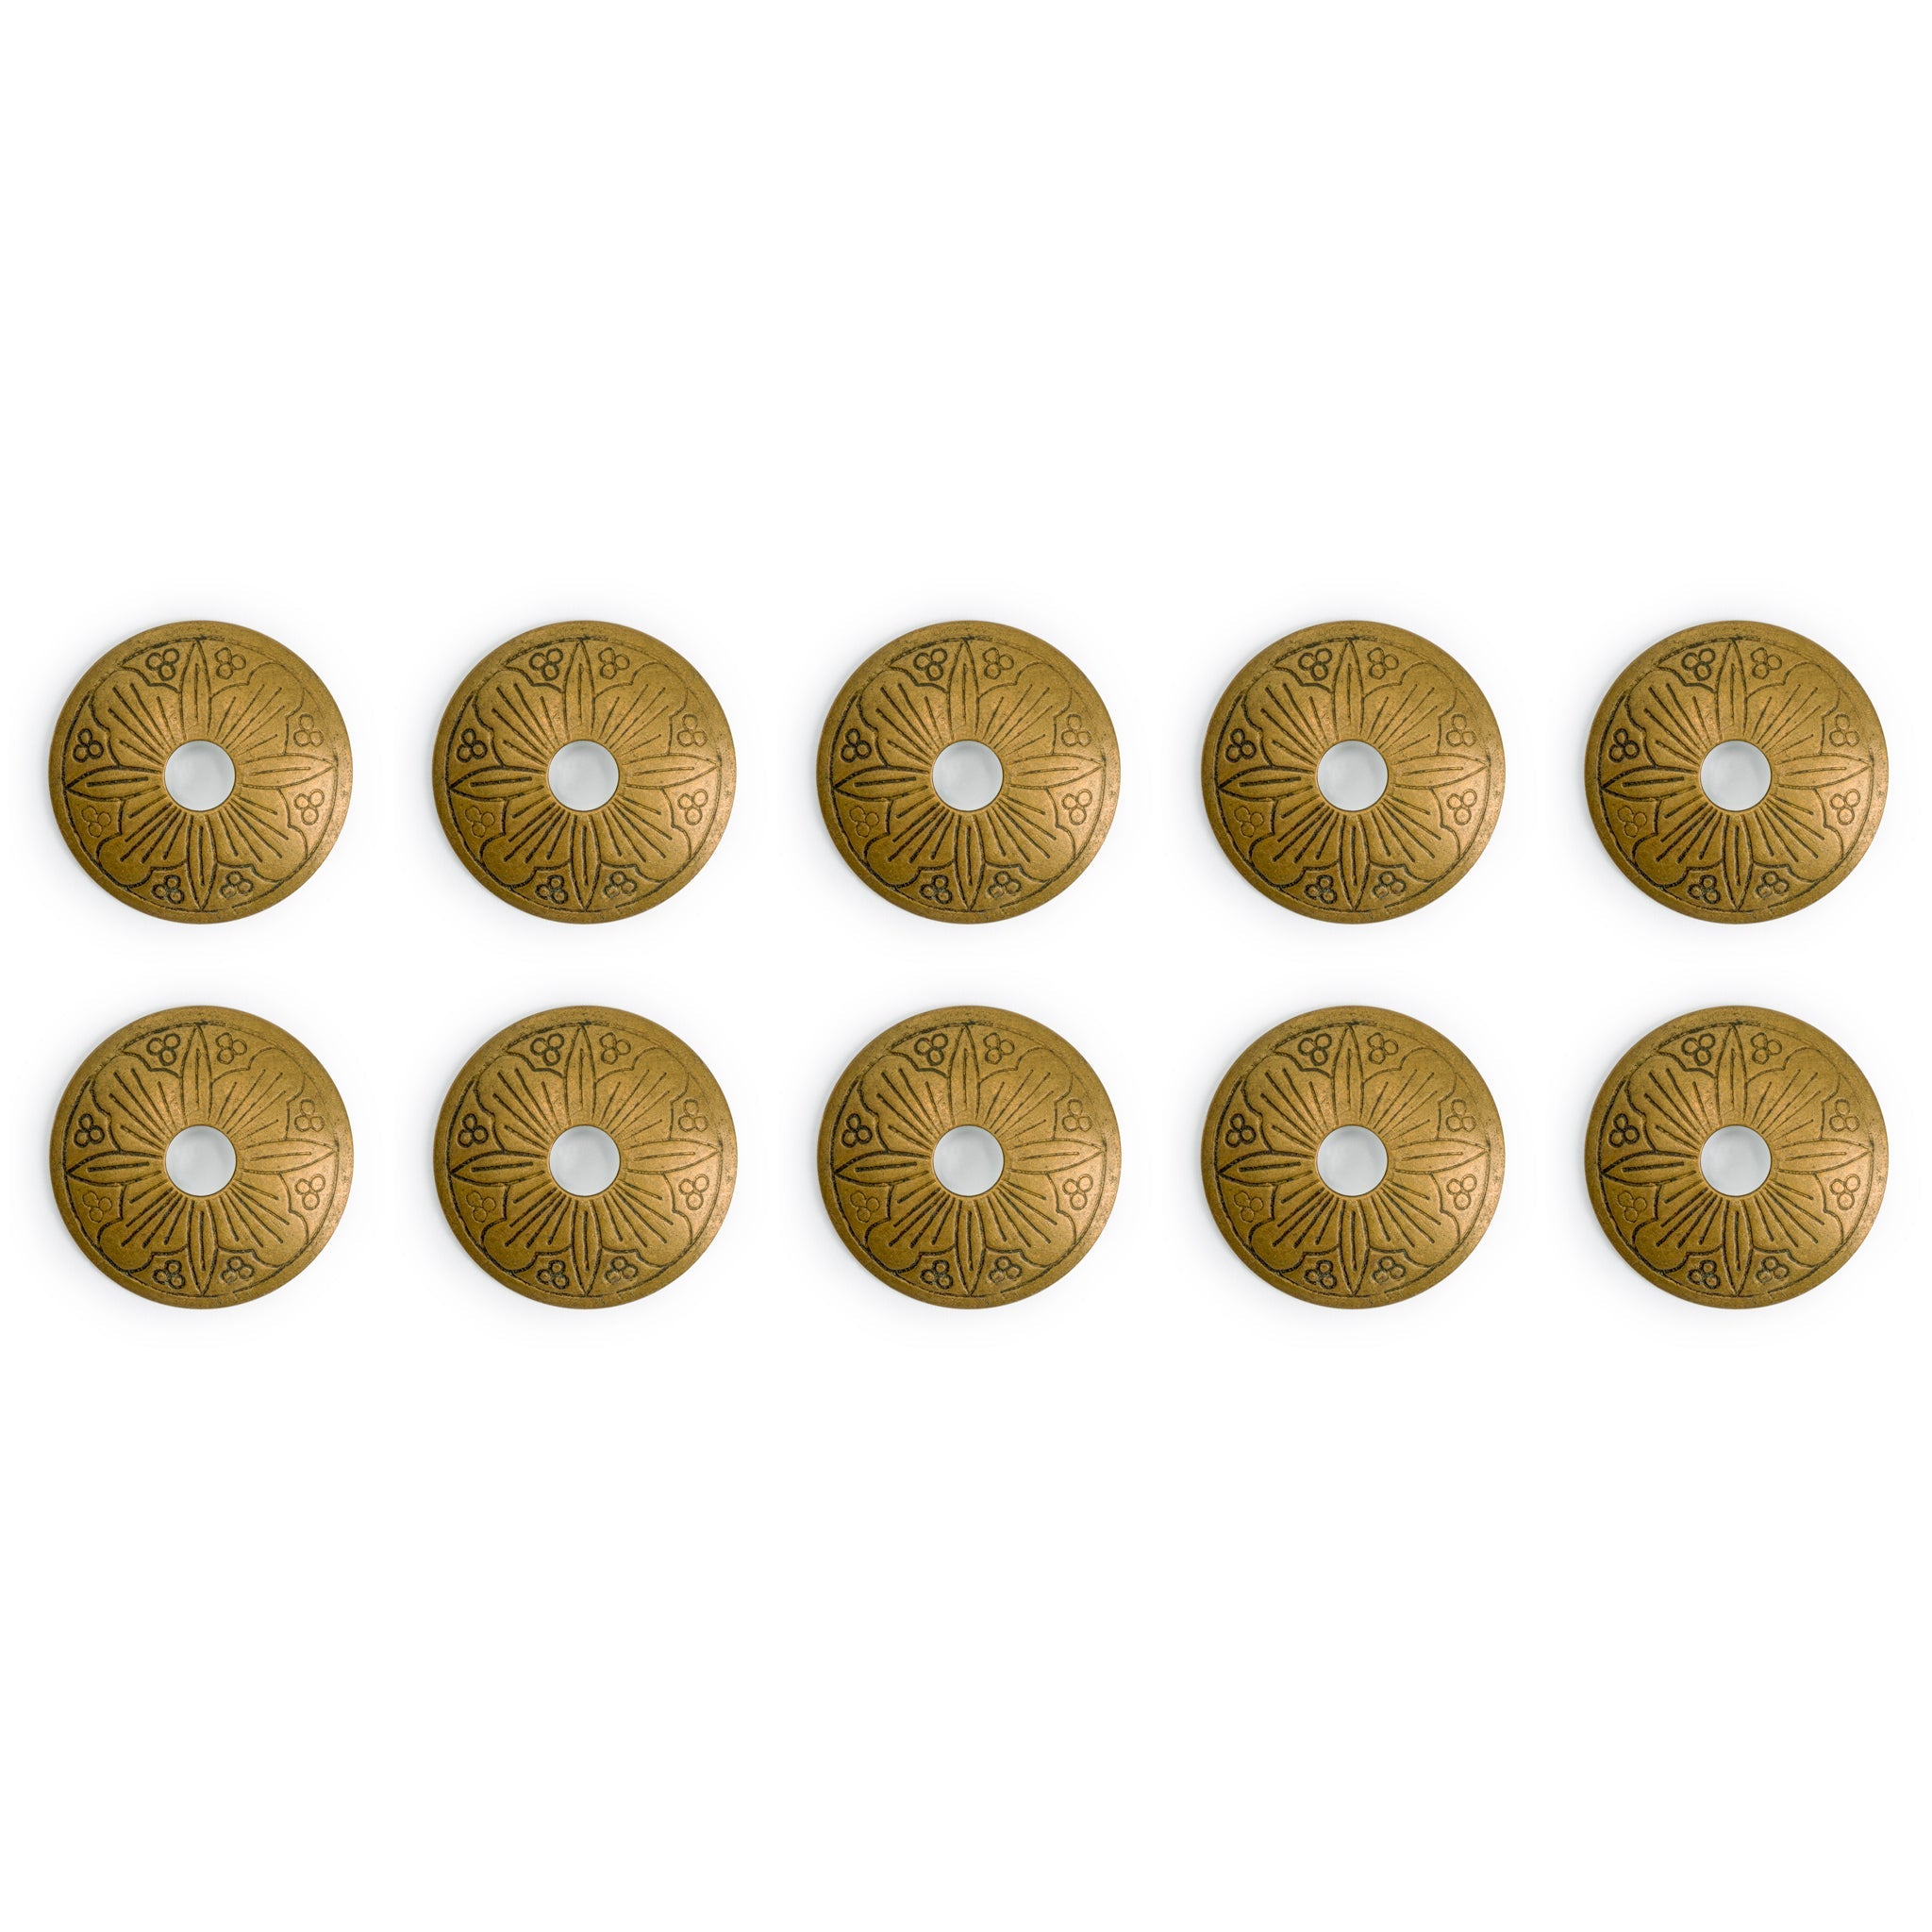 Floral Washers 1.3" - Set of 10-Chinese Brass Hardware